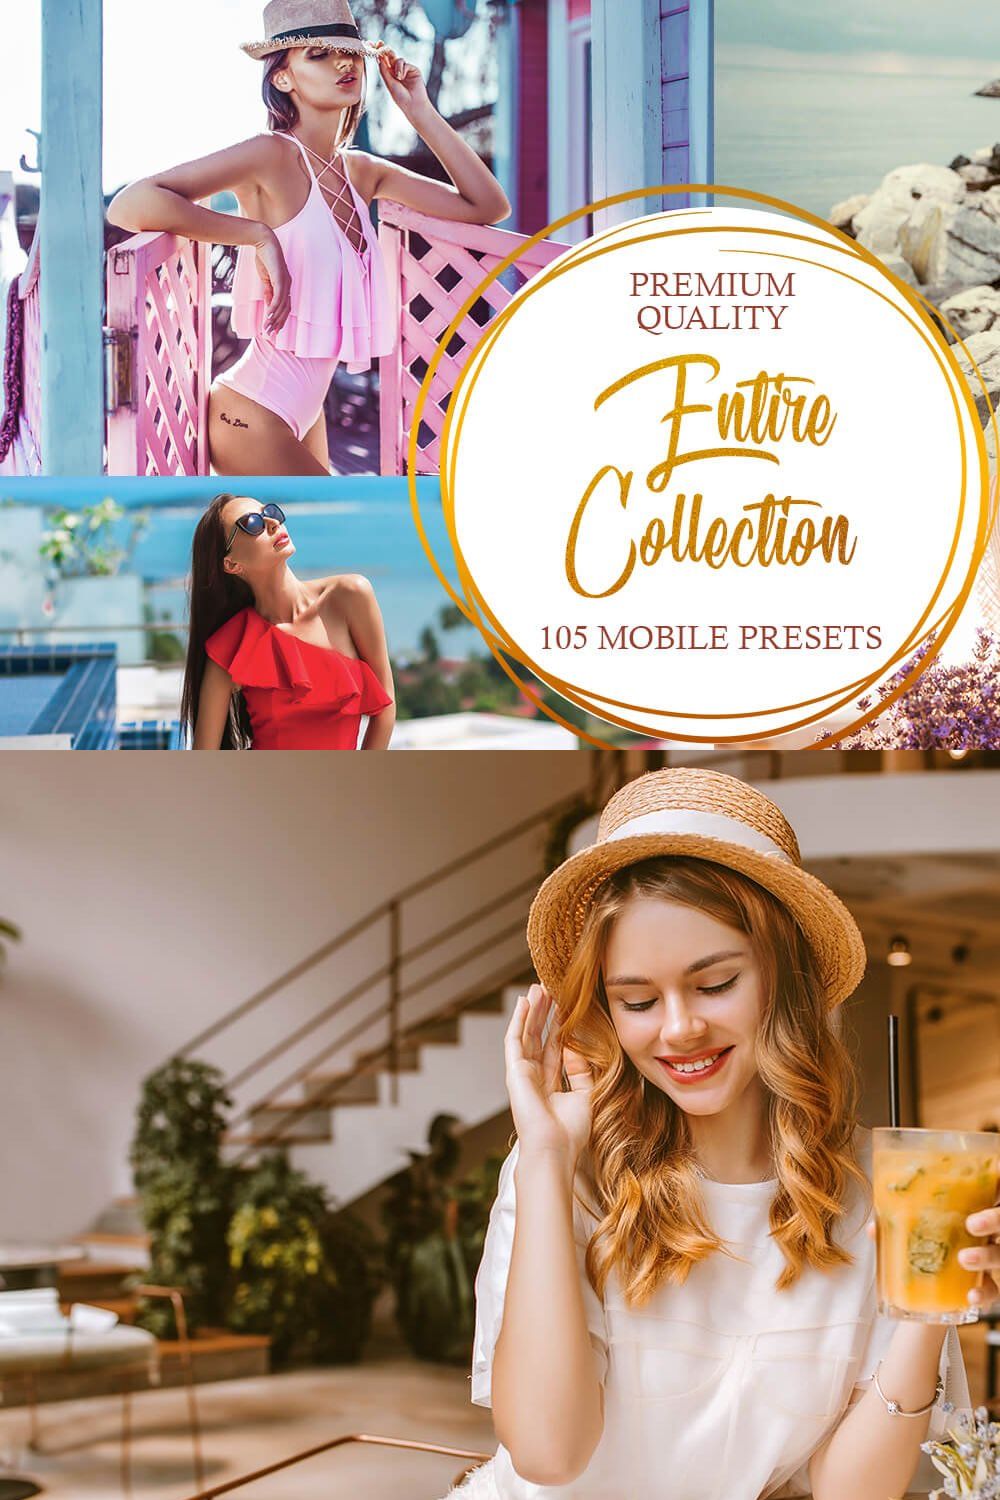 Entire Collection Mobile Presets pinterest preview image.